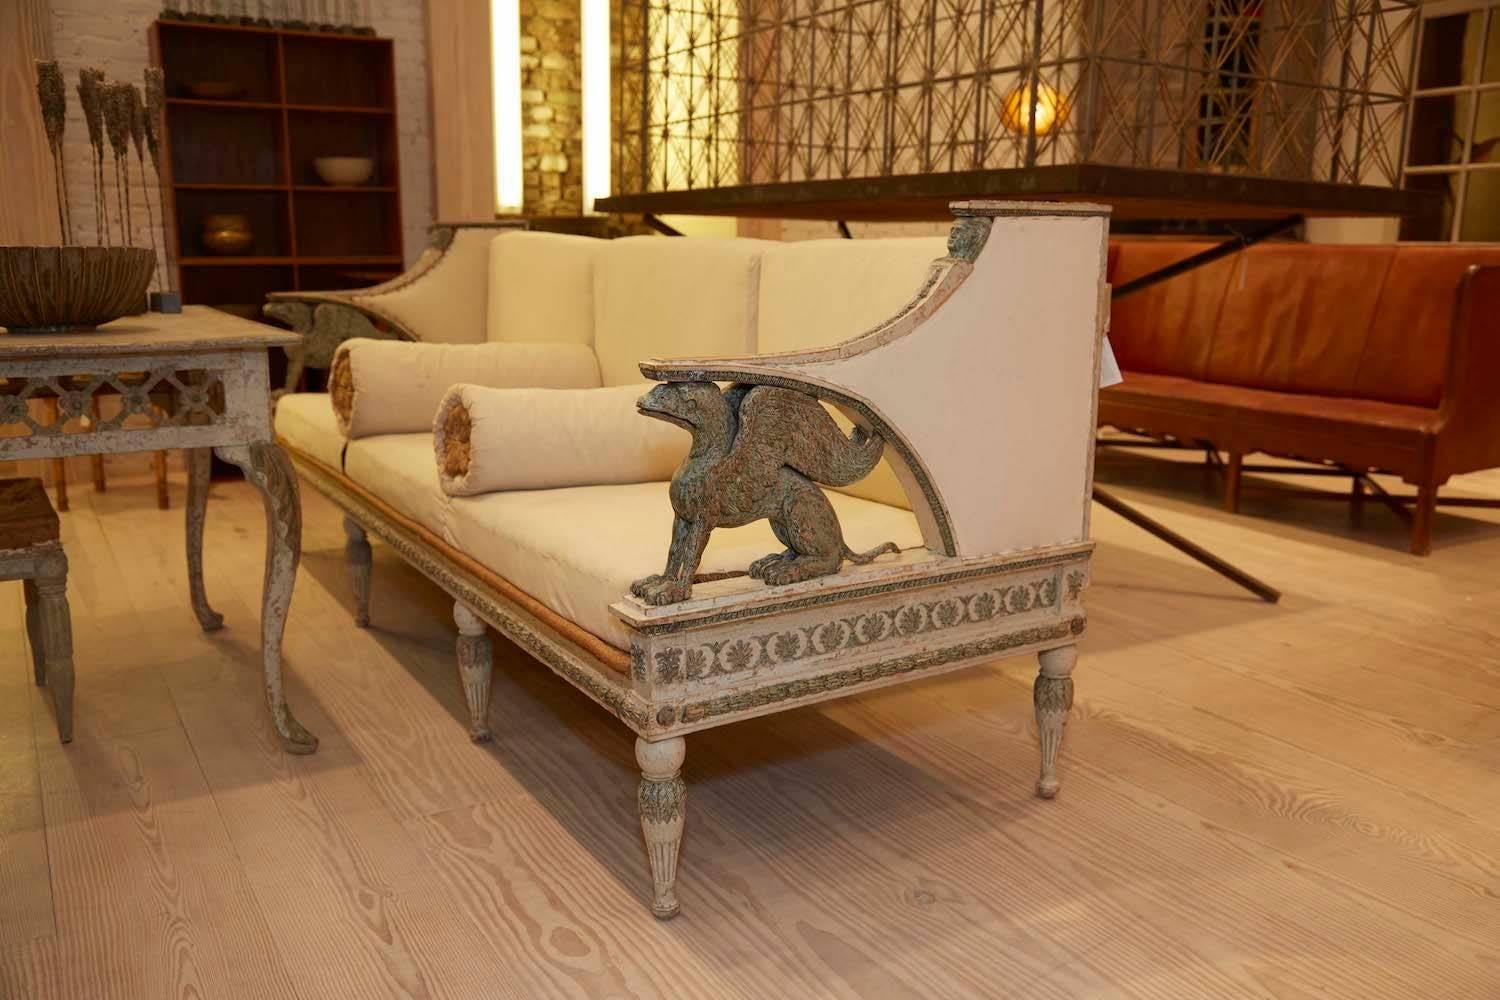 Ephraim Ståhl (1767 Stockholm 1820), Late Gustavian griffin sofa with Egyptian heads, origin: Stockholm, Sweden, circa 1795

Almost identical sofas from the permanent collections in the Nordiska Museets, as illustrated in:
1. Ephraim Ståhl by Eva